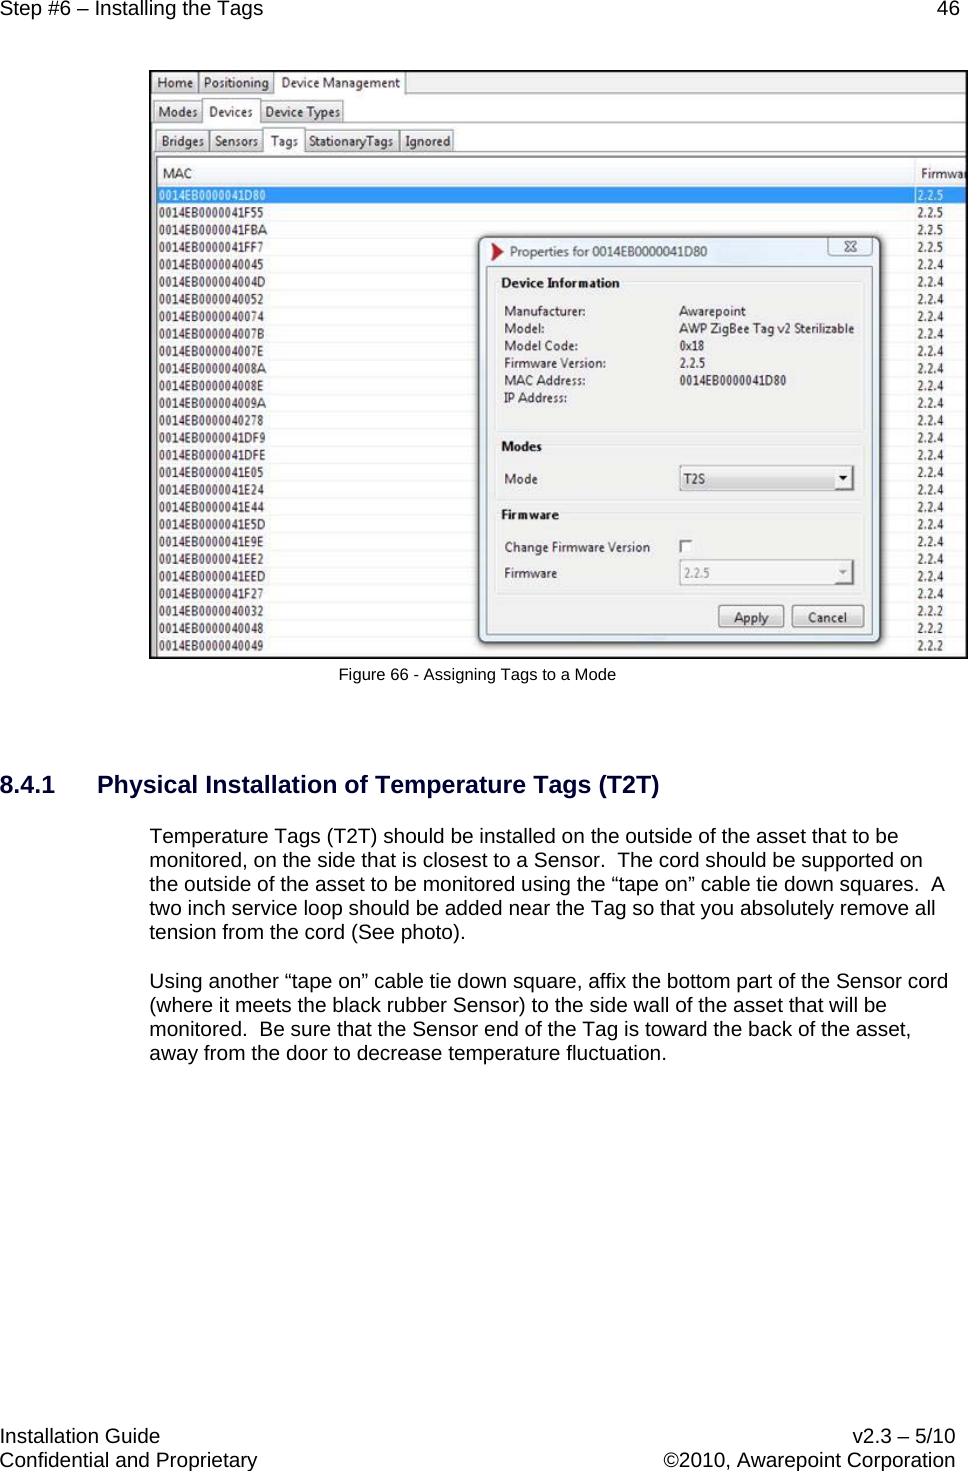 Step #6 – Installing the Tags    46   Installation Guide    v2.3 – 5/10 Confidential and Proprietary    ©2010, Awarepoint Corporation   Figure 66 - Assigning Tags to a Mode  8.4.1 Physical Installation of Temperature Tags (T2T) Temperature Tags (T2T) should be installed on the outside of the asset that to be monitored, on the side that is closest to a Sensor.  The cord should be supported on the outside of the asset to be monitored using the “tape on” cable tie down squares.  A two inch service loop should be added near the Tag so that you absolutely remove all tension from the cord (See photo).   Using another “tape on” cable tie down square, affix the bottom part of the Sensor cord (where it meets the black rubber Sensor) to the side wall of the asset that will be monitored.  Be sure that the Sensor end of the Tag is toward the back of the asset, away from the door to decrease temperature fluctuation.   